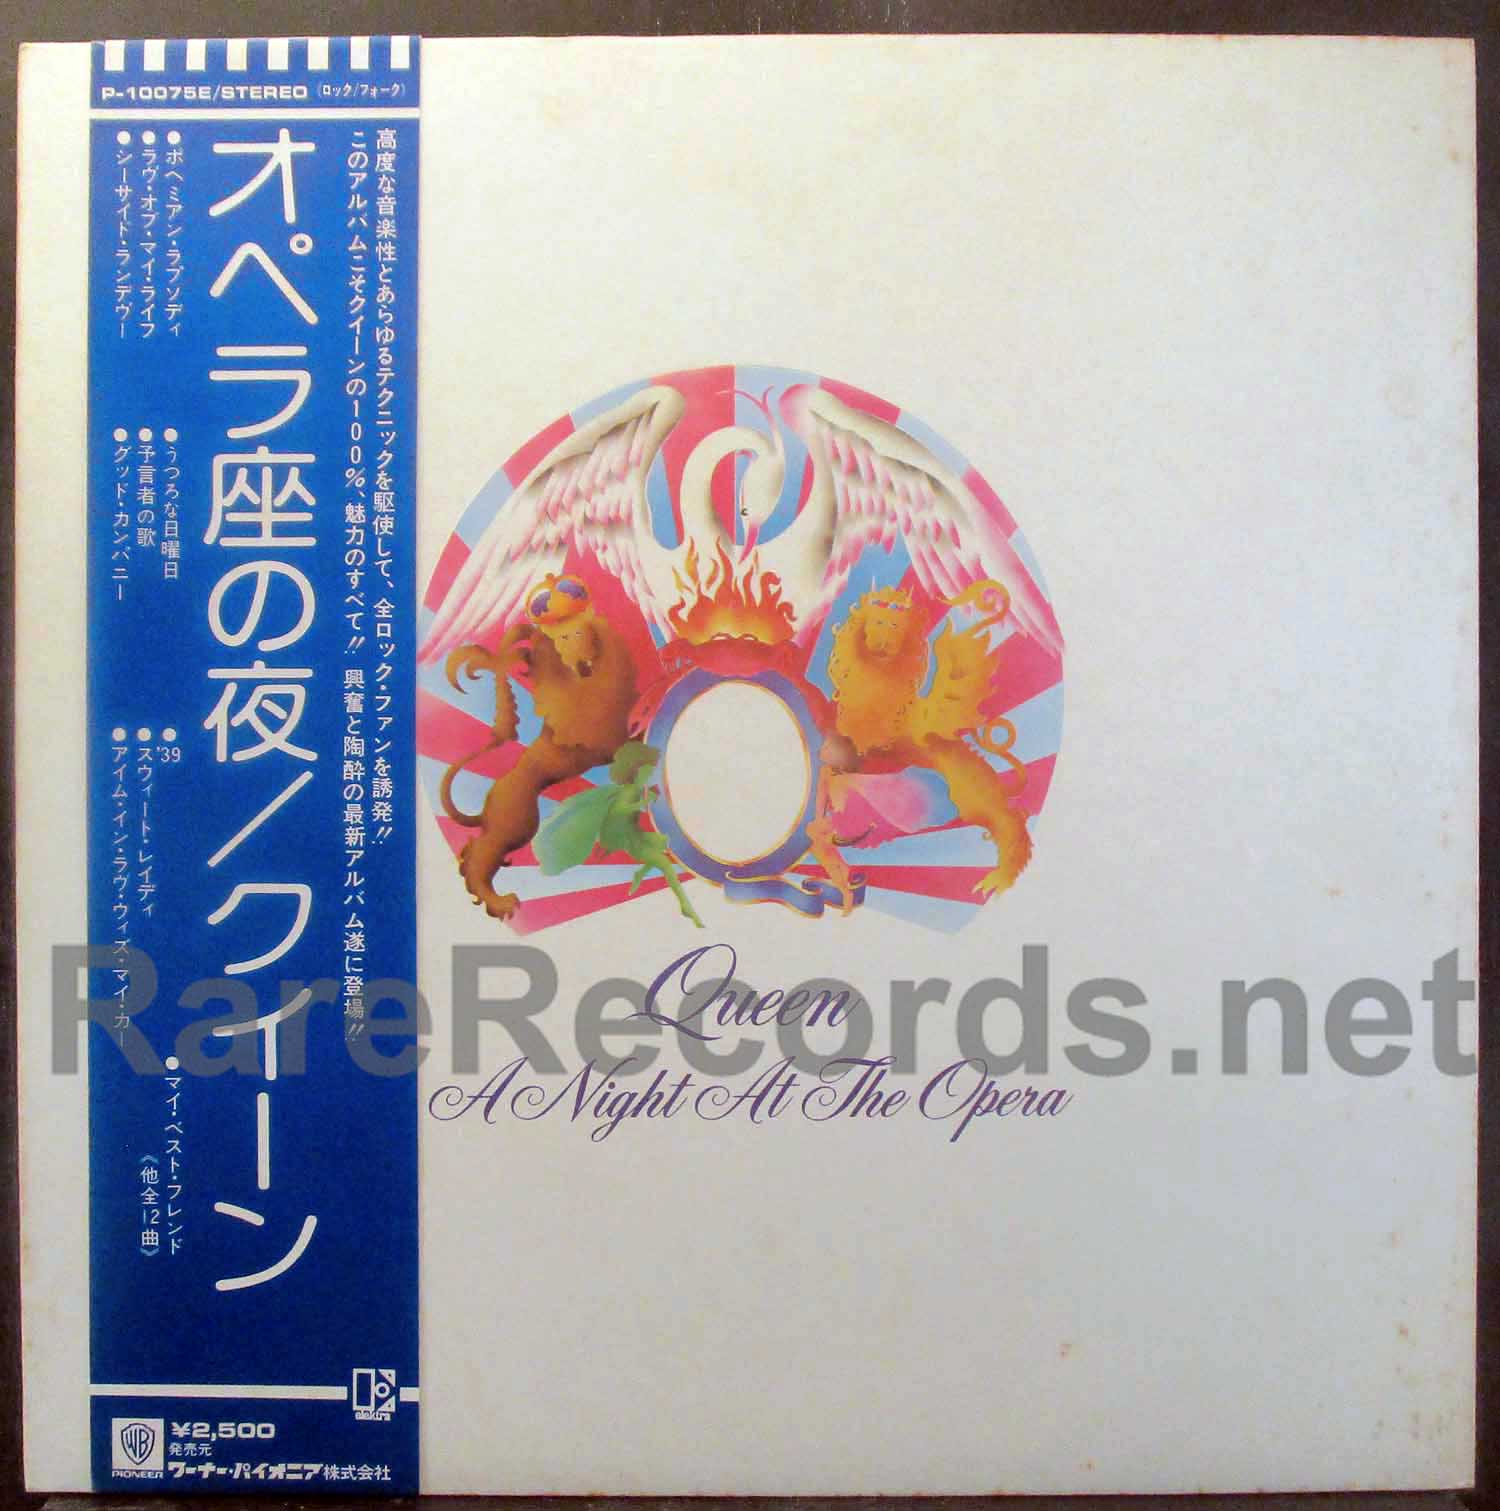 Queen - A Night at the Opera original Japan LP with obi